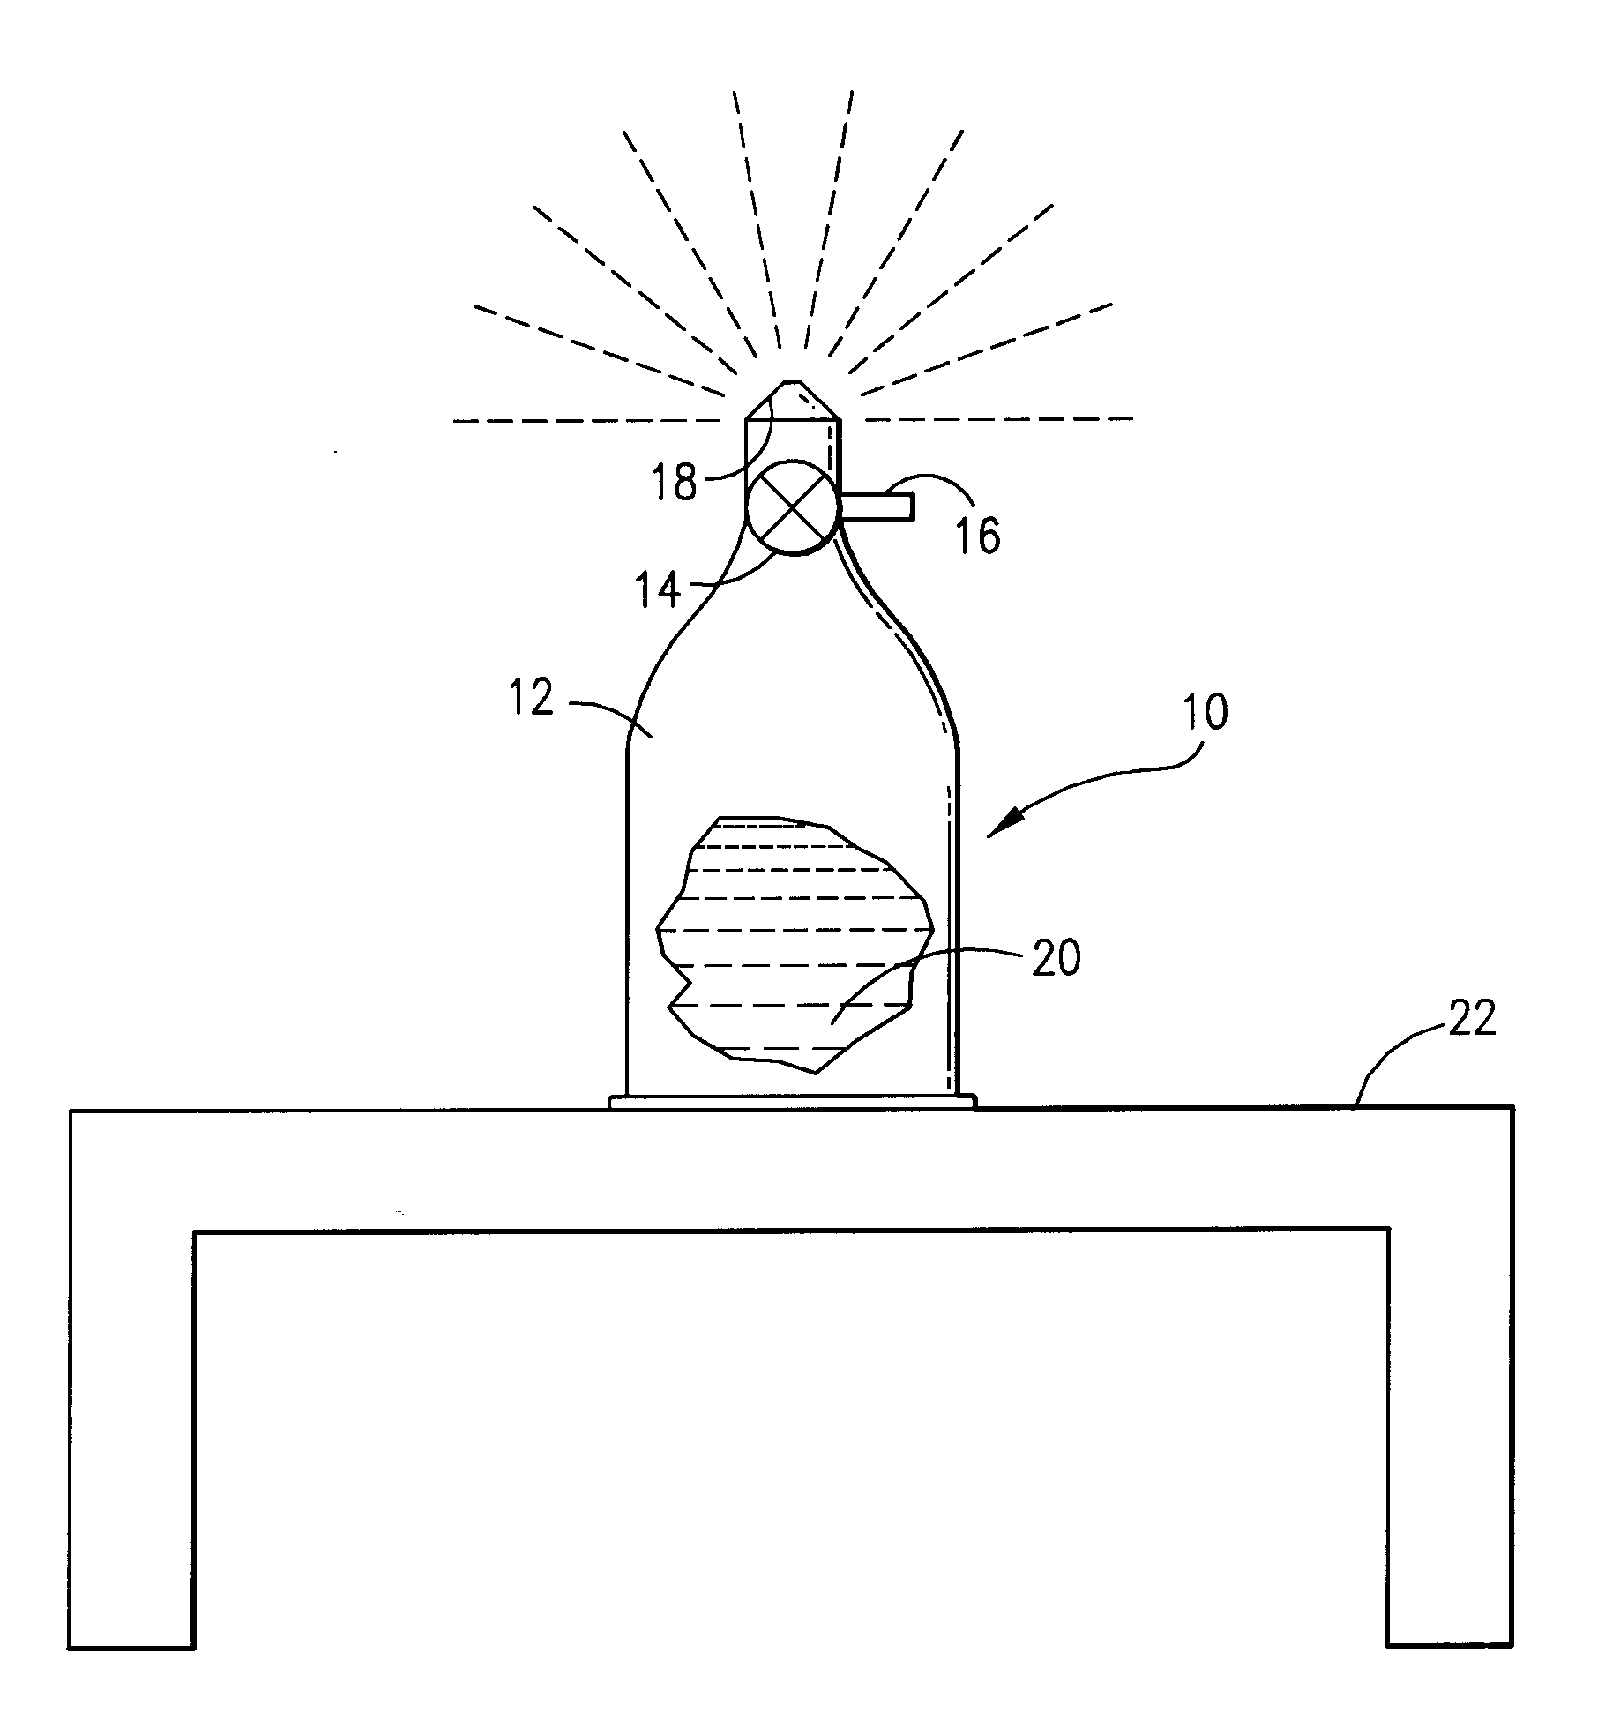 Single-use aerosol spray can to disinfect enclosed spaces and methods for its use